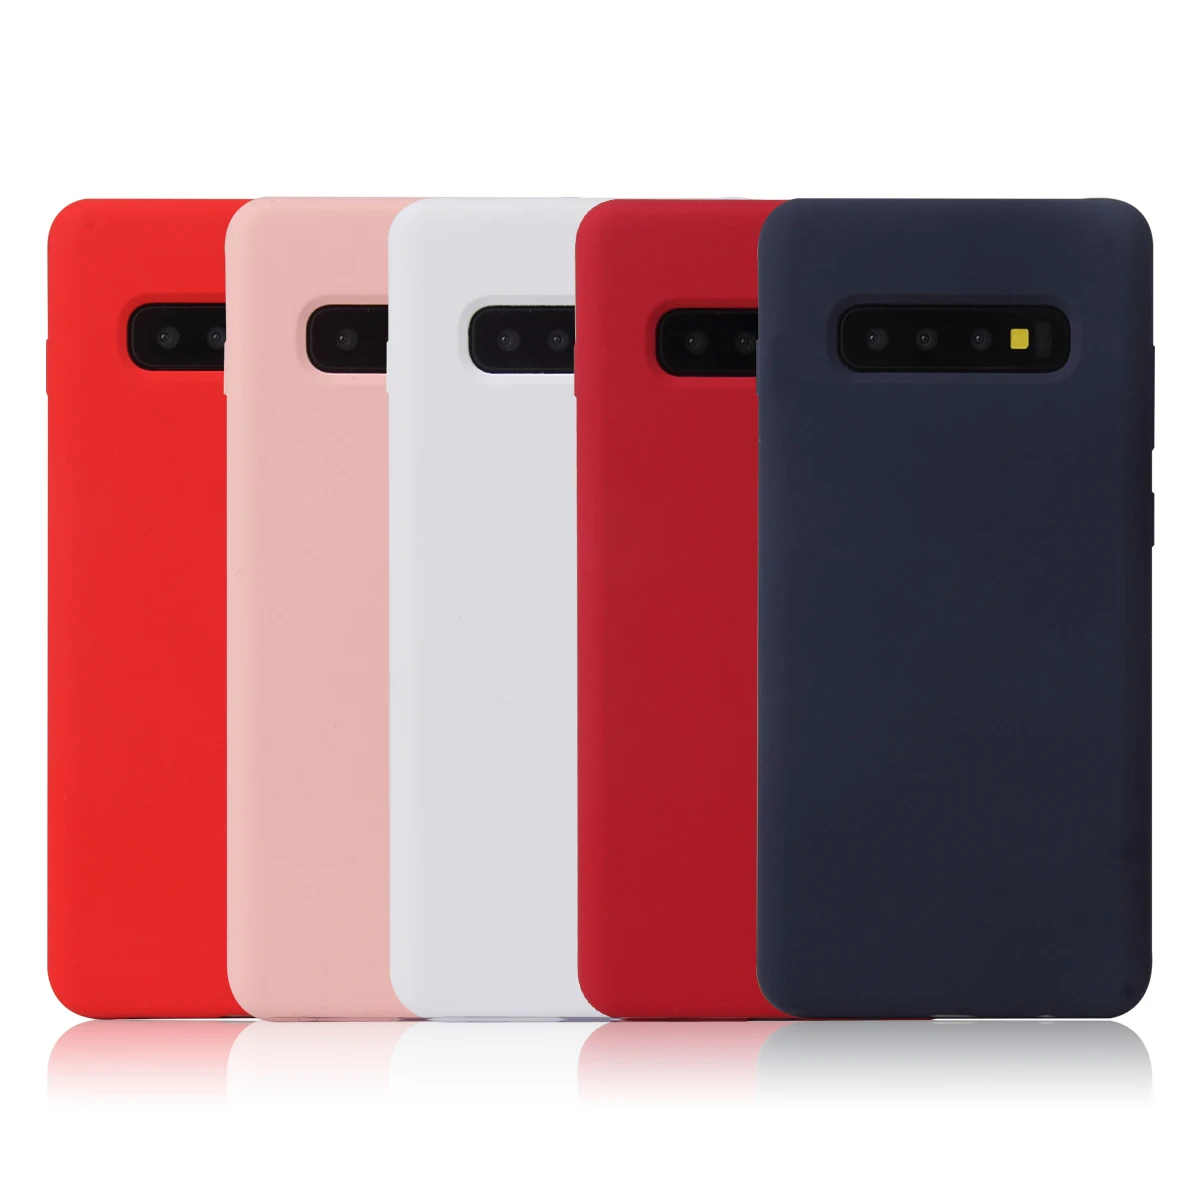 

NEW Best Seller Liquid Silicone Back Cover Cell Phone Case For Samsung Galaxy S10 Series, Red\black\pink;15 colors available ( oem colors)